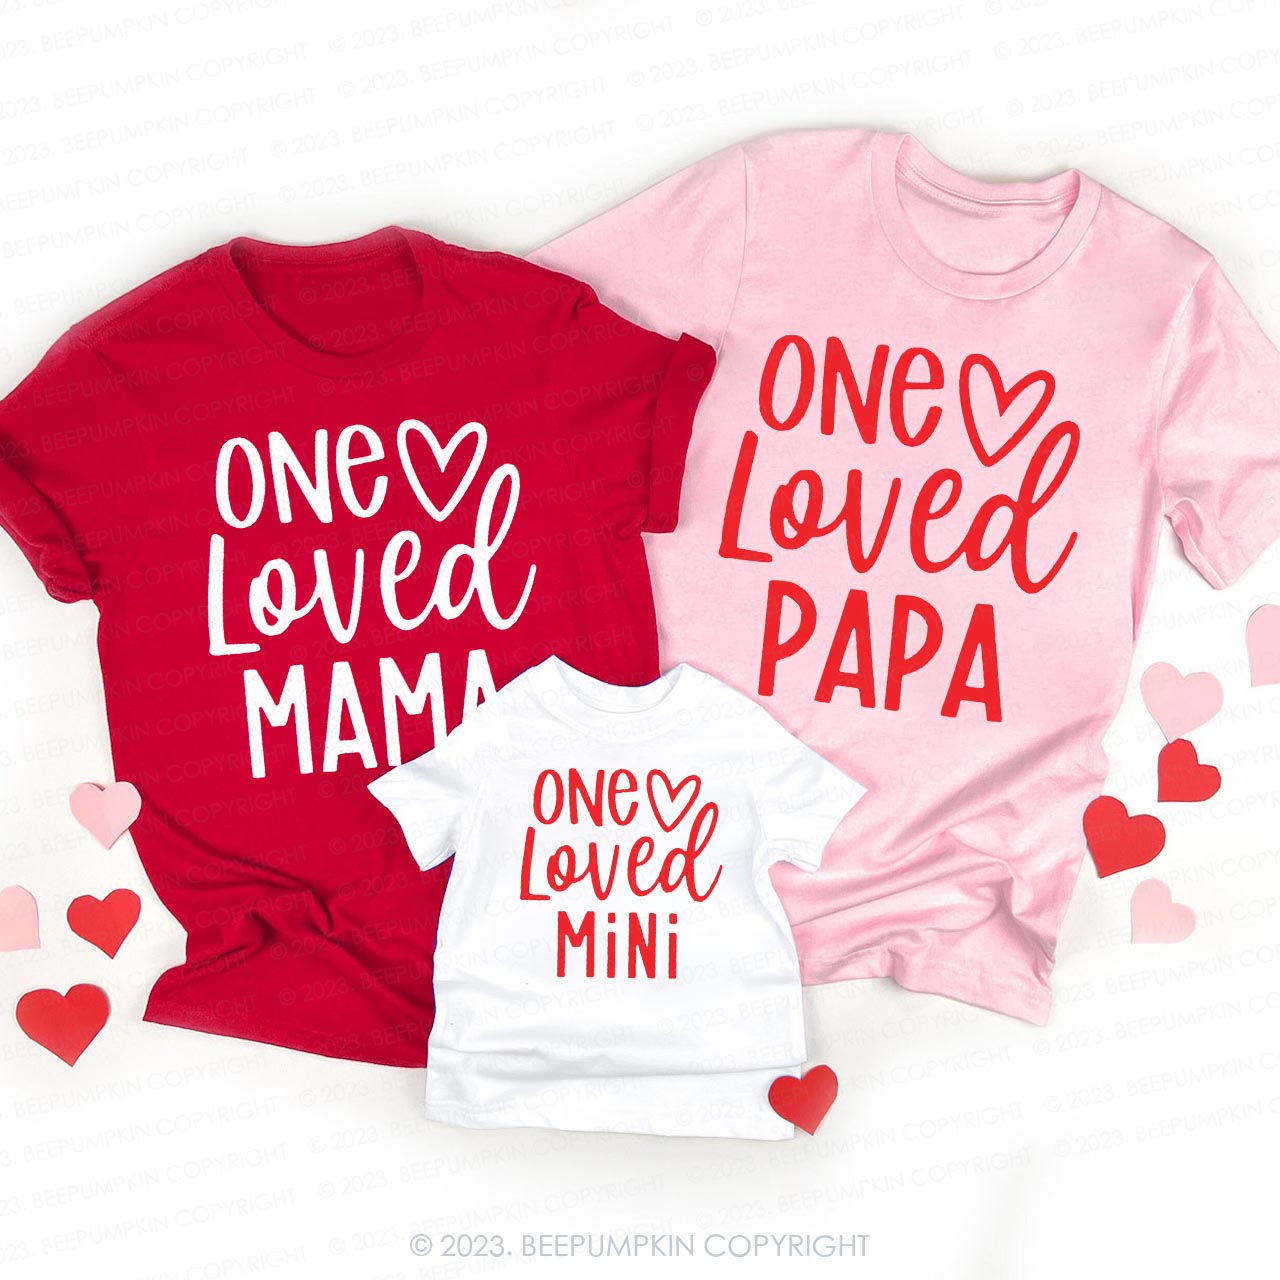 One Loved Hearts Valentines Day Shirts For Family